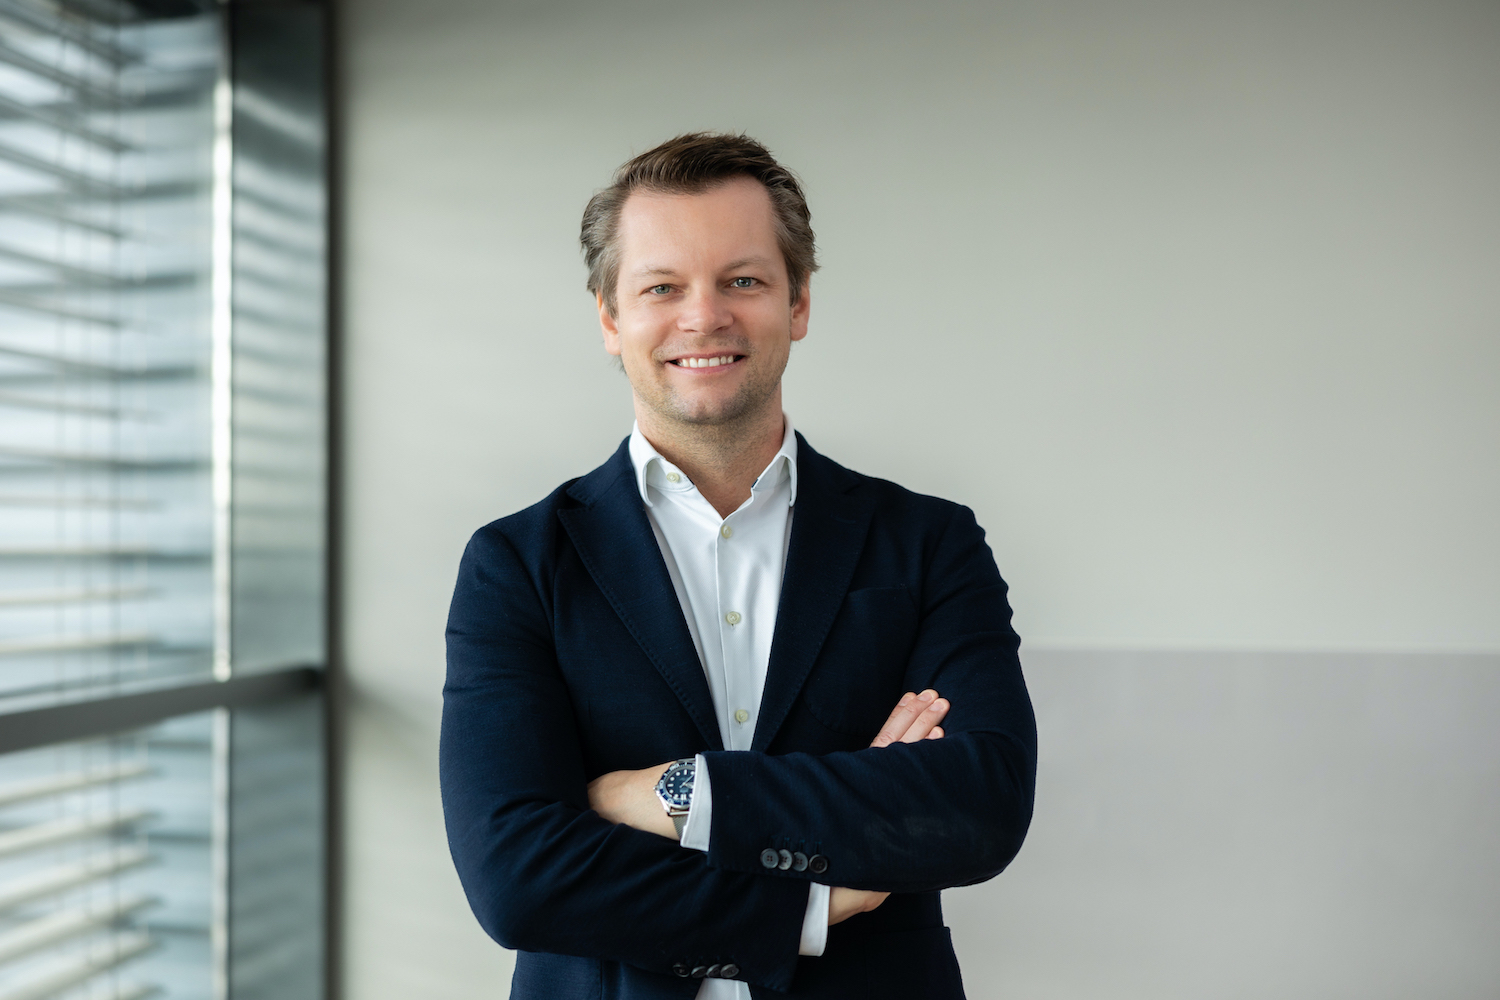 Porsche Romania appoints Andreas Burgholzer as General Manager and continues its offensive in the electric segment